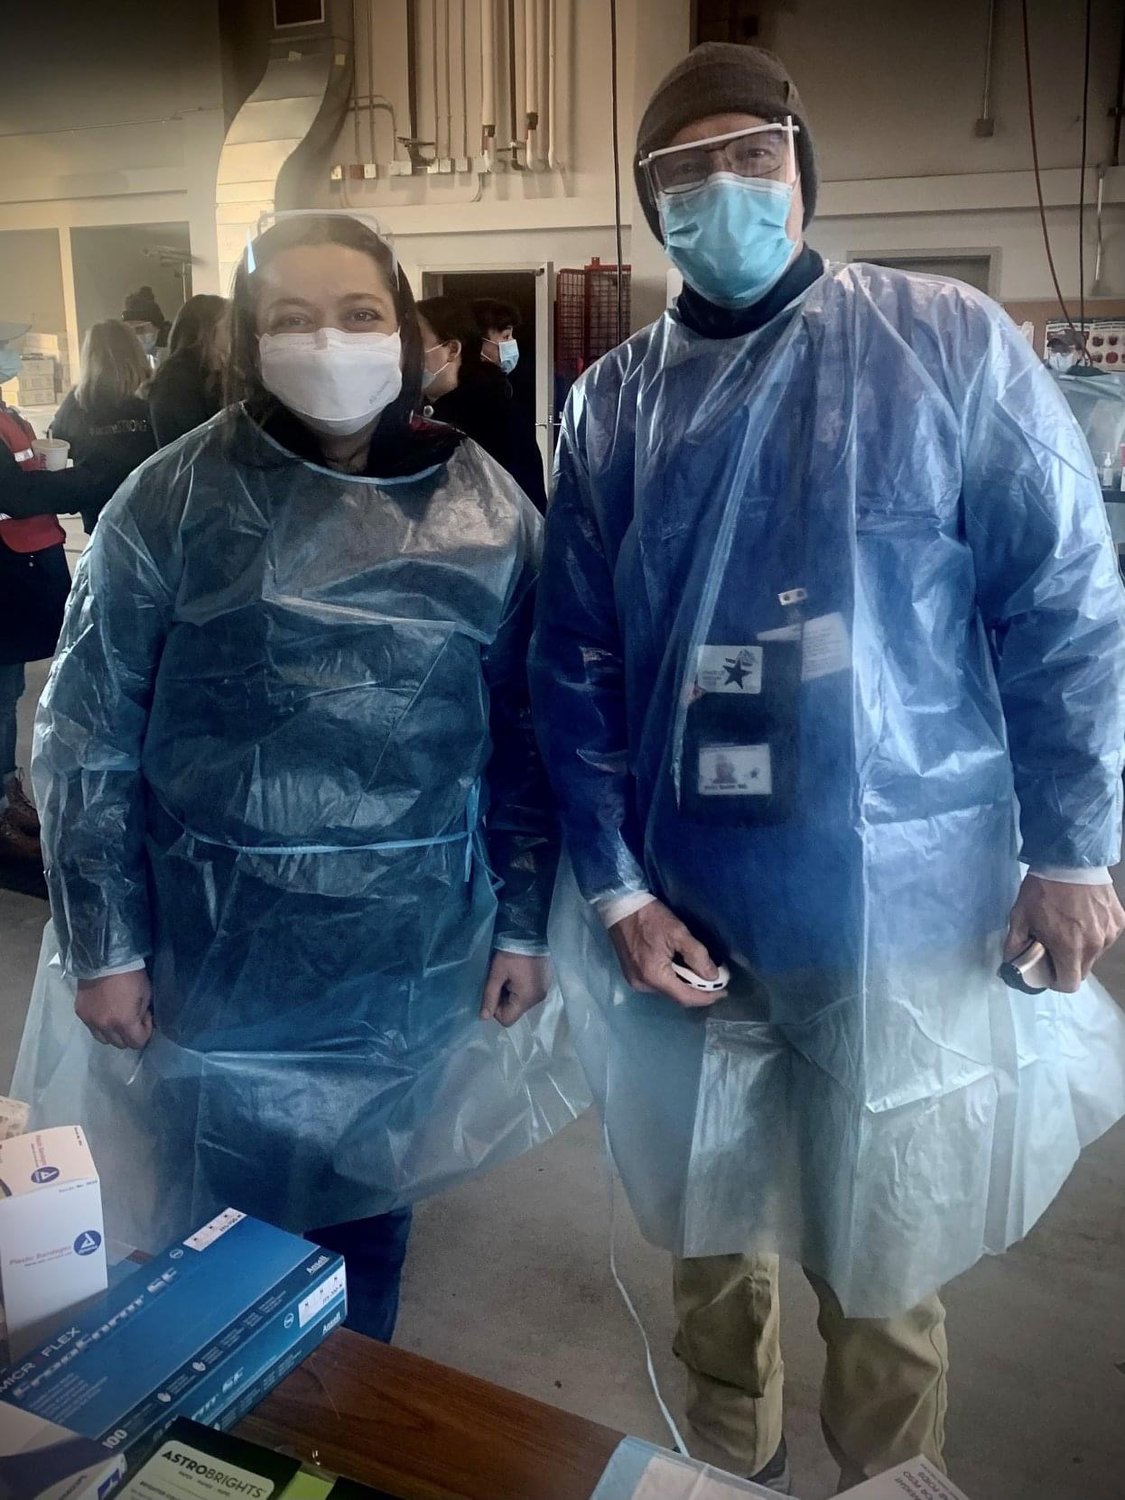 Thurston County Health Officer Dr. Dimyana Abdelmalek (left) and Medical Reserve Corps Physician Dr. Britt Smith (right) prepare to vaccinate patients on Mar. 6, 2021.